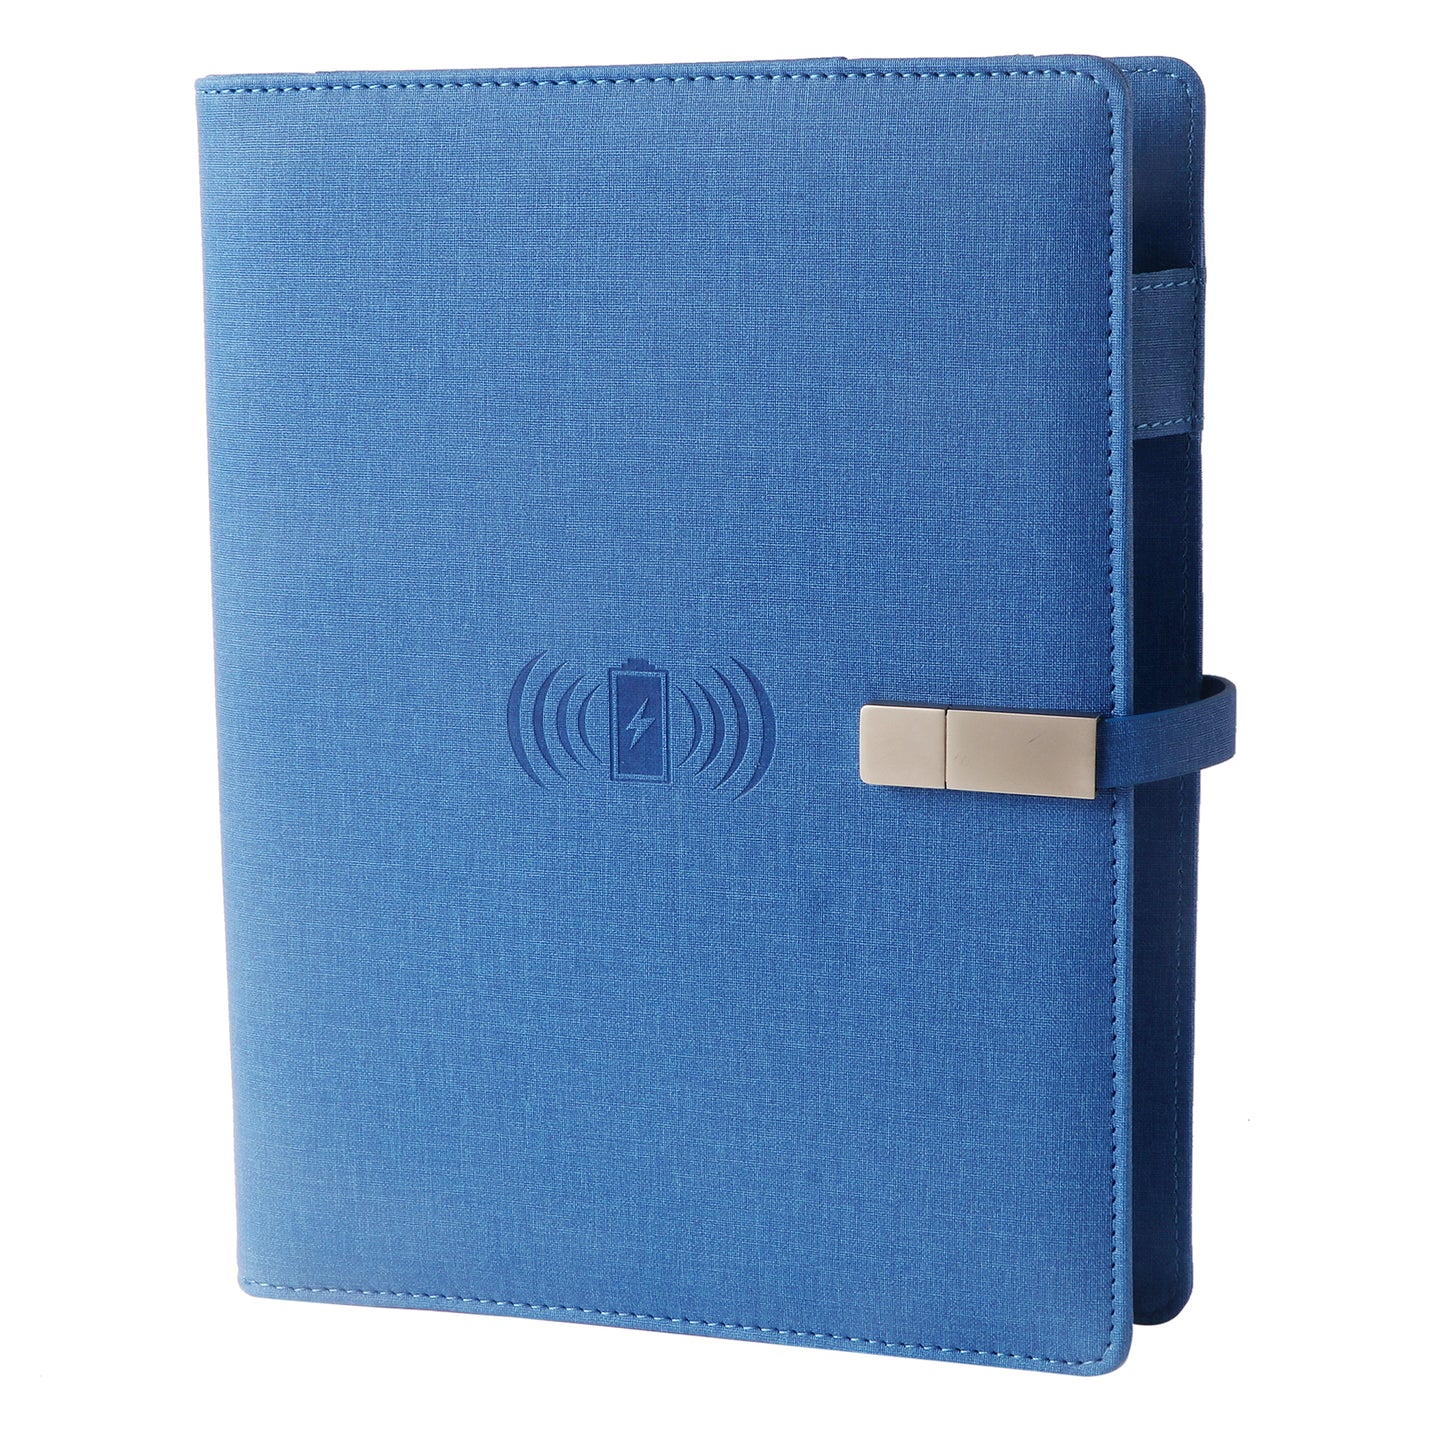 Personalized Blue Jute 8000mAh Notebook Diary Power Bank with 16gb Pen Drive - For Office Use, Personal Use, Return Gift, or Corporate Gifting - HK10103